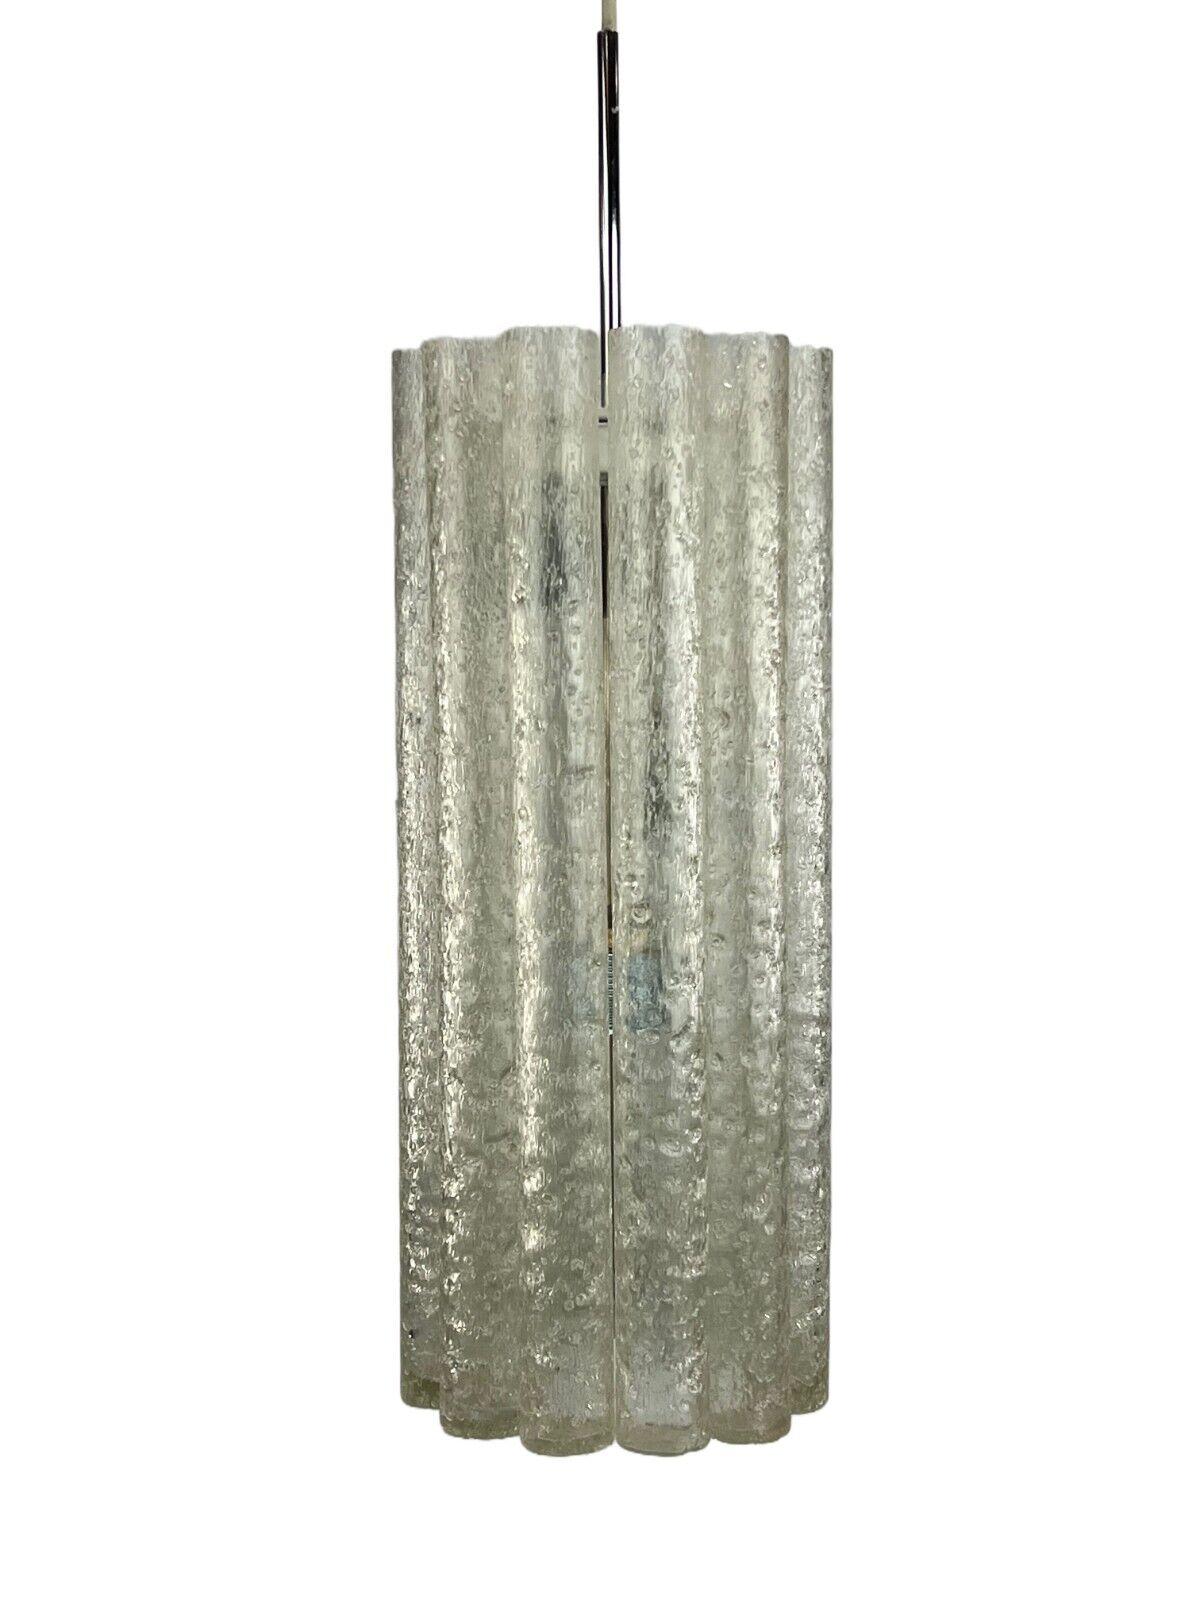 60s 70s lamp ceiling lamp chandelier Doria chrome glass space age design

Object: chandelier

Manufacturer: Doria

Condition: good

Age: around 1960-1970

Dimensions:

Diameter = 20cm
Height = 46.5cm

Other notes:

3x E27